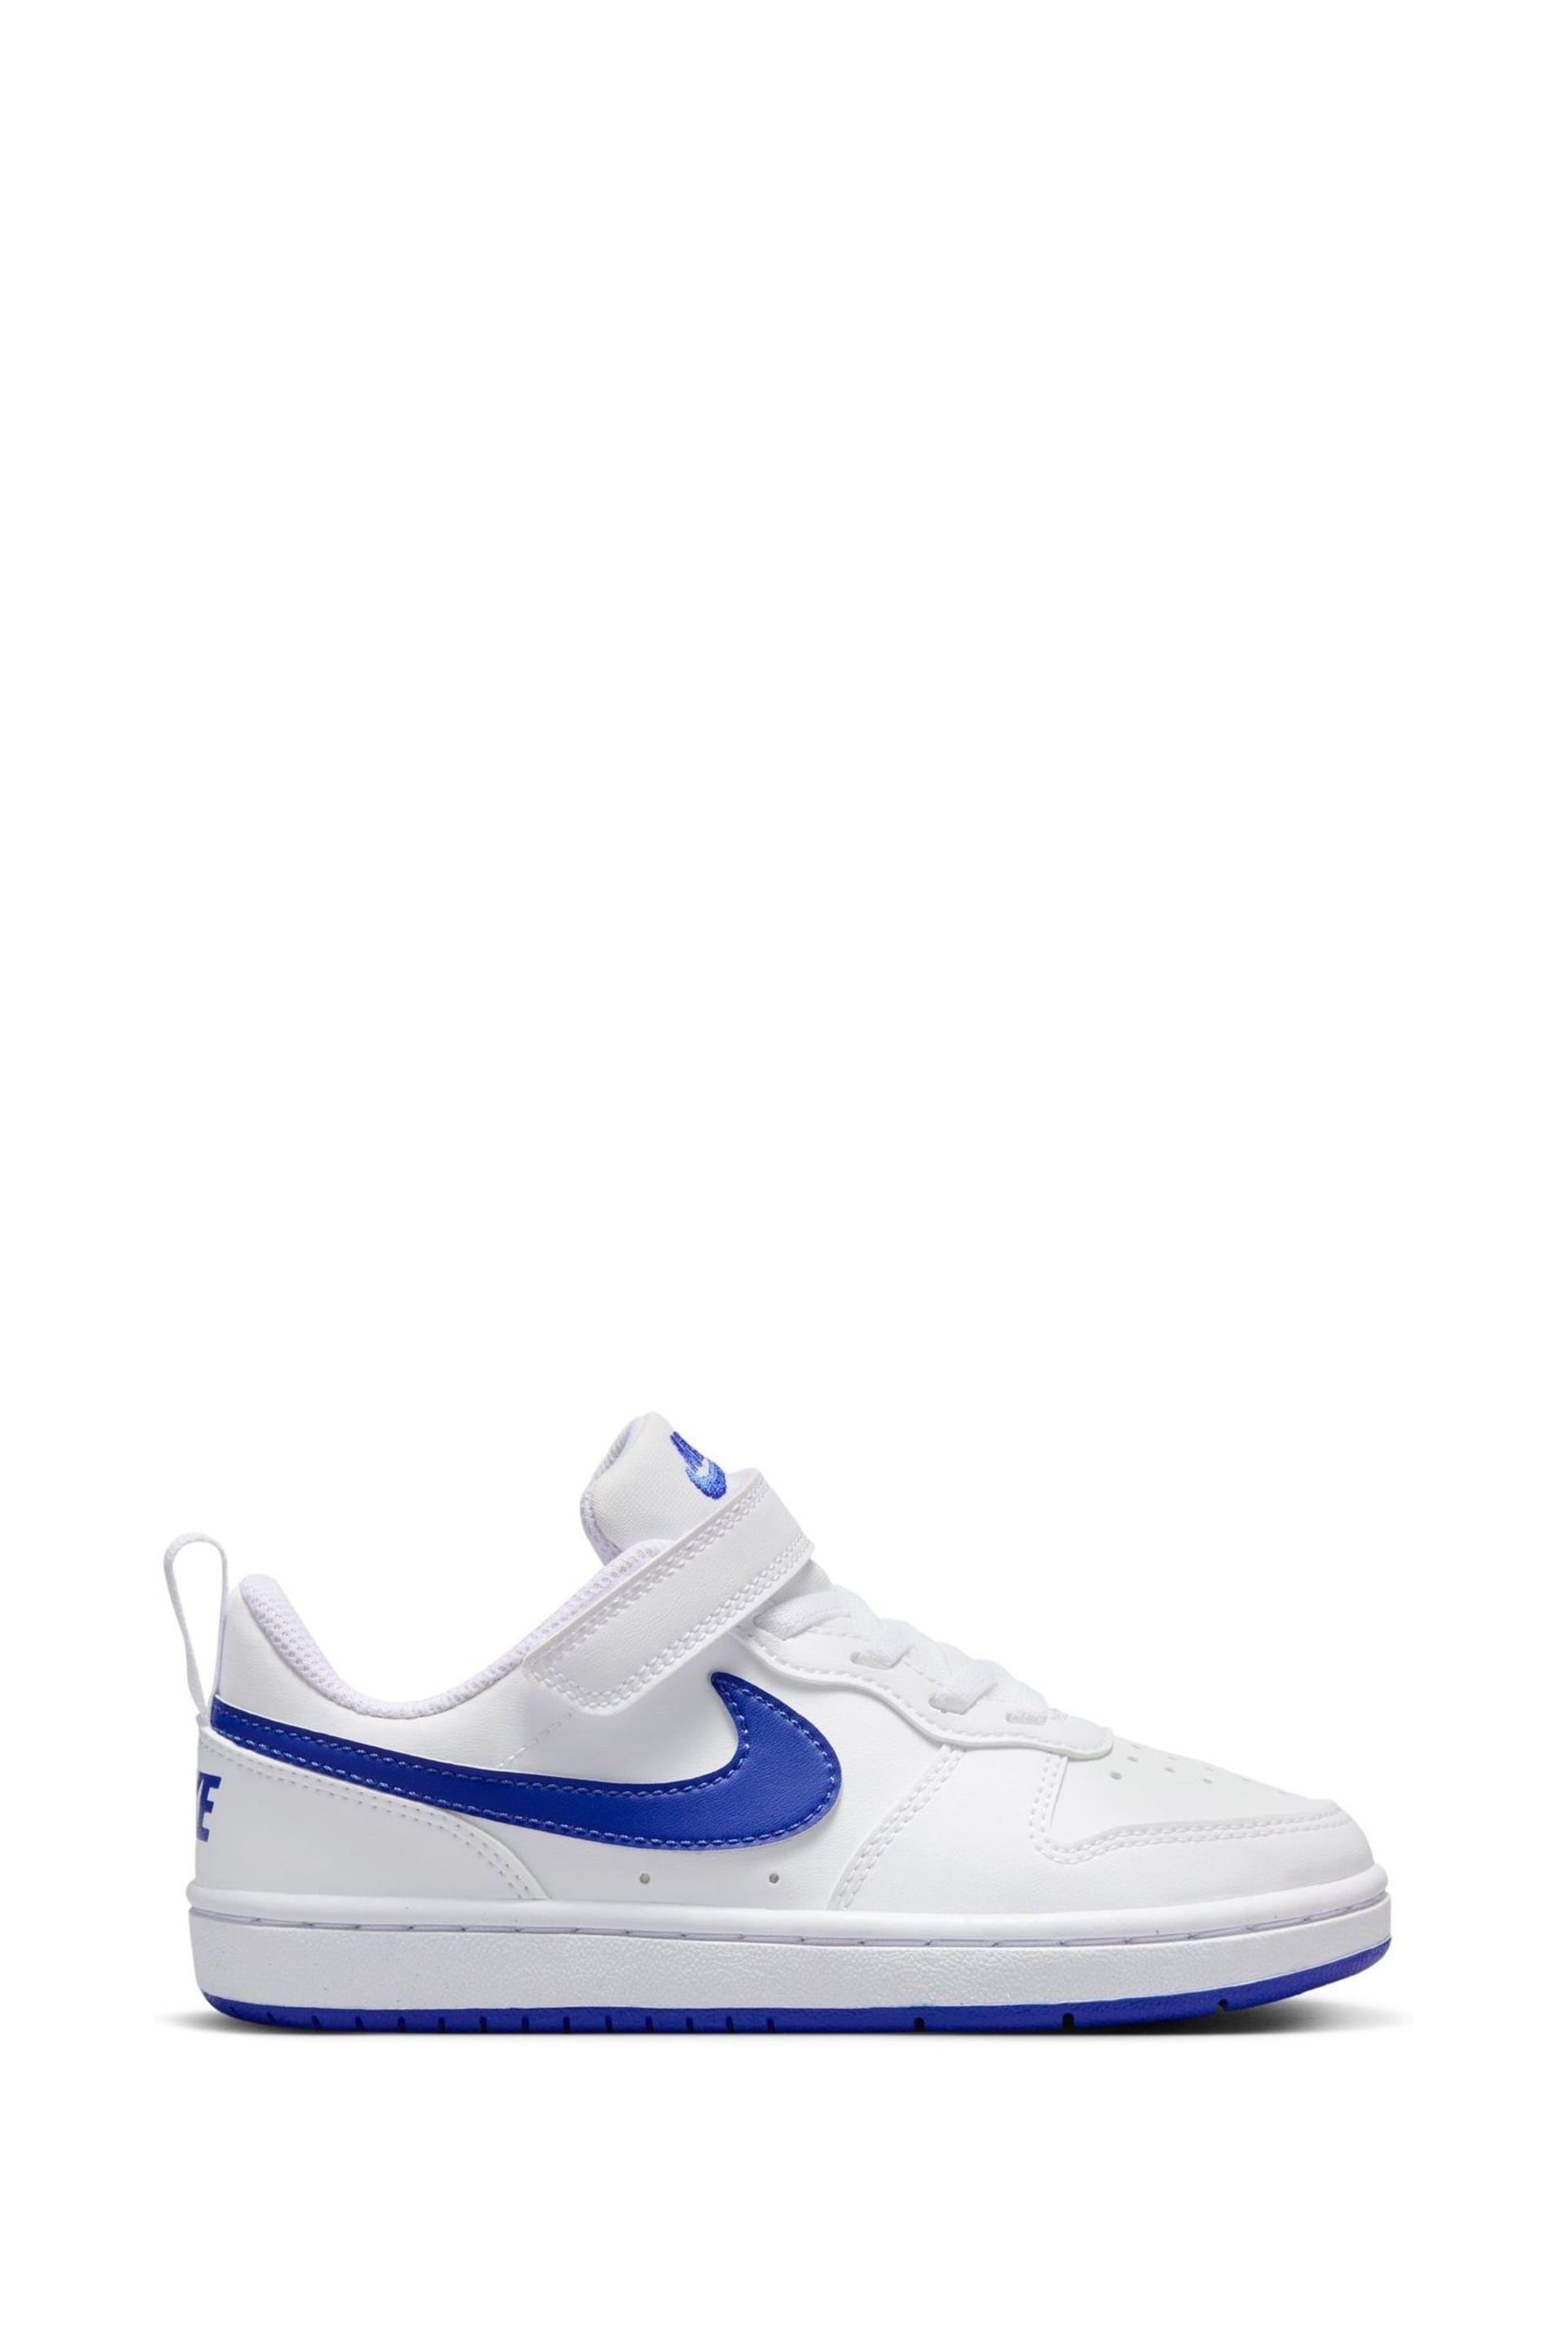 Nike White/Blue Junior Court Borough Low Recraft Trainers - Image 1 of 12